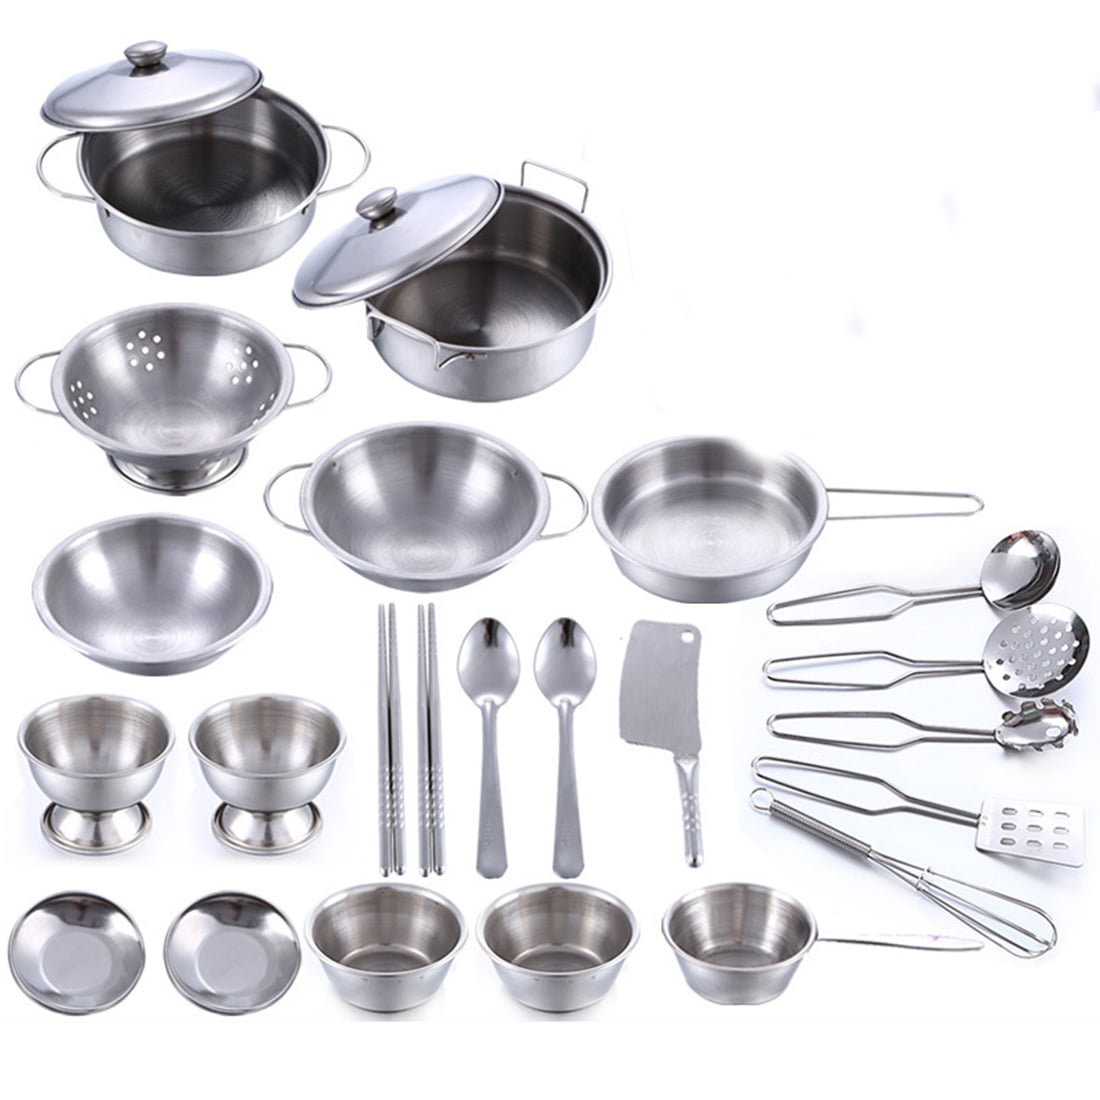 25PCS Kids Stainless Steel Play House Toys Children Kitchen Cooking Pretend Set 